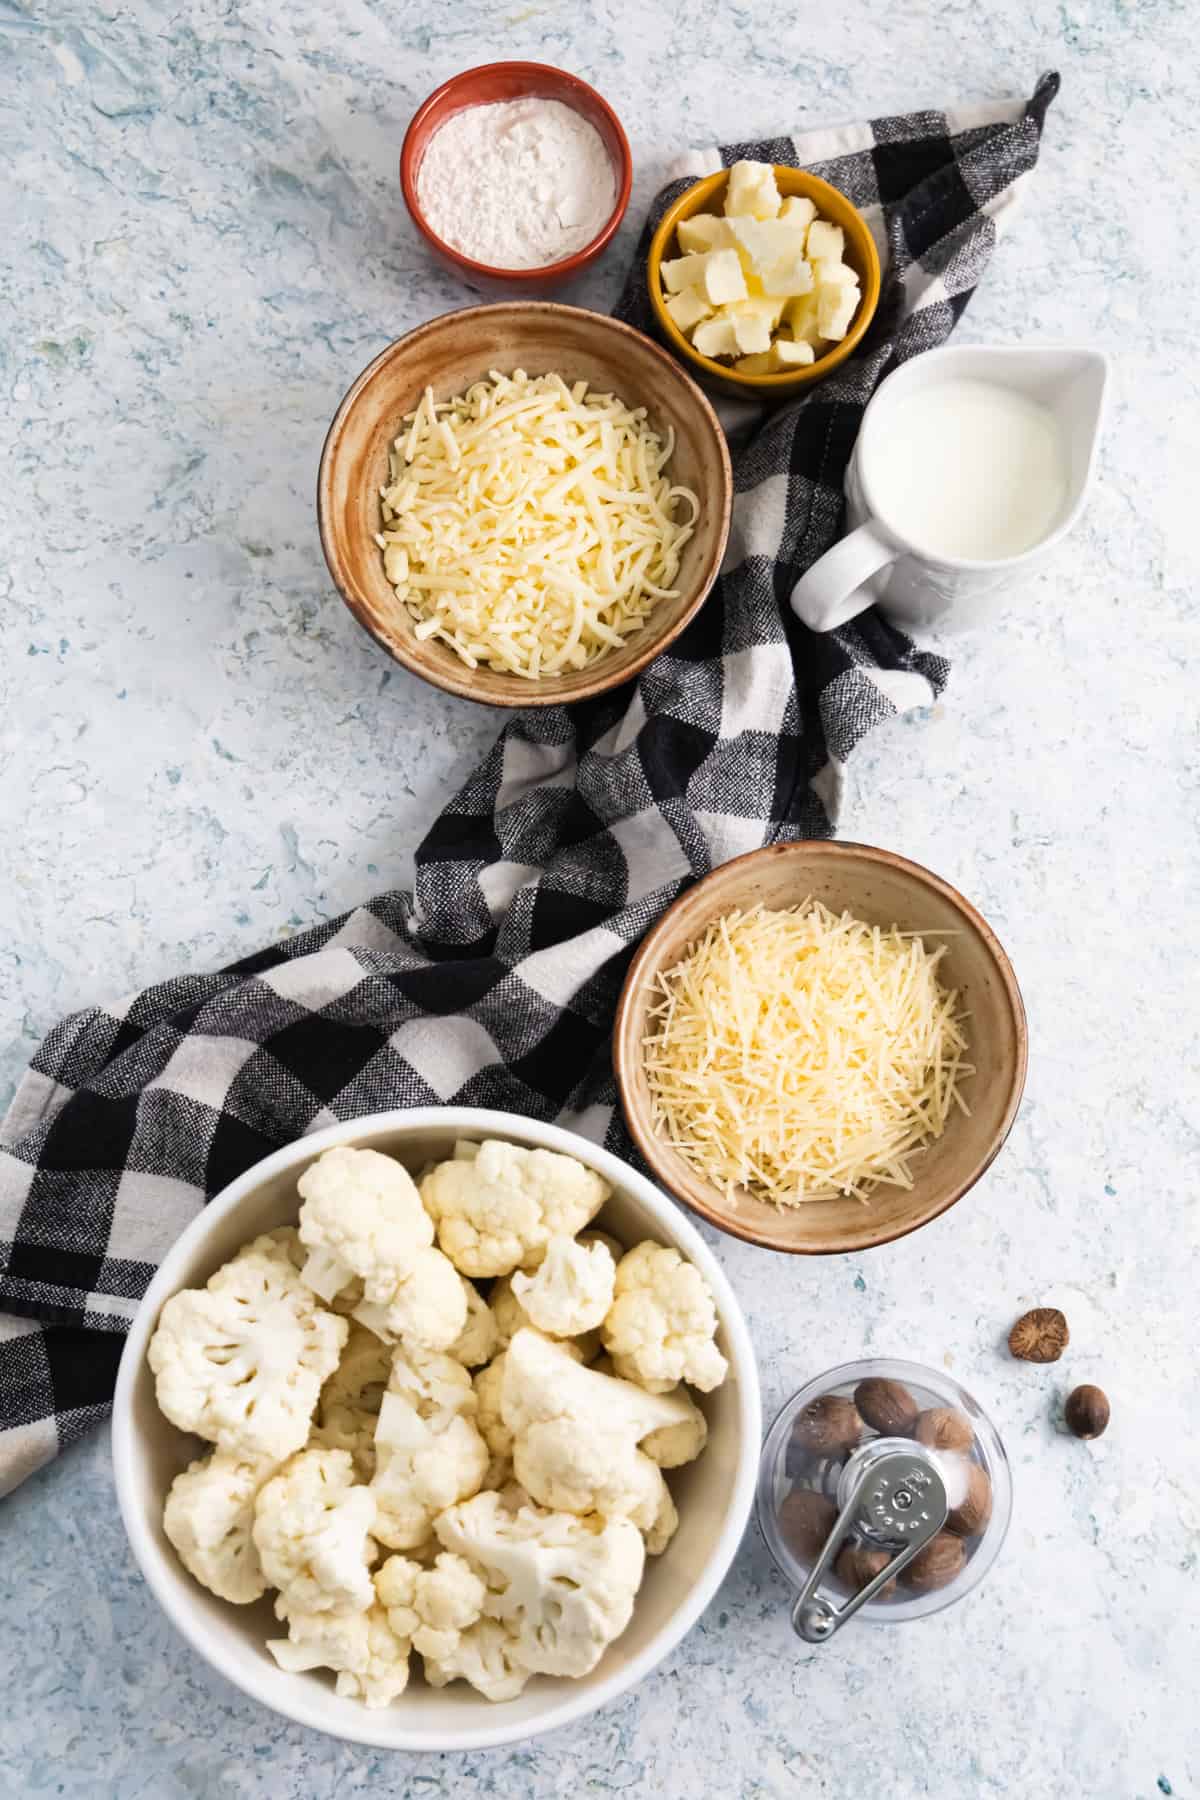 Top view of ingredients, 2 small ramekins with cubed butter and flour, 2 bowls with grated cheese, a small pitcher of milk and a large bowl with cauliflower florets